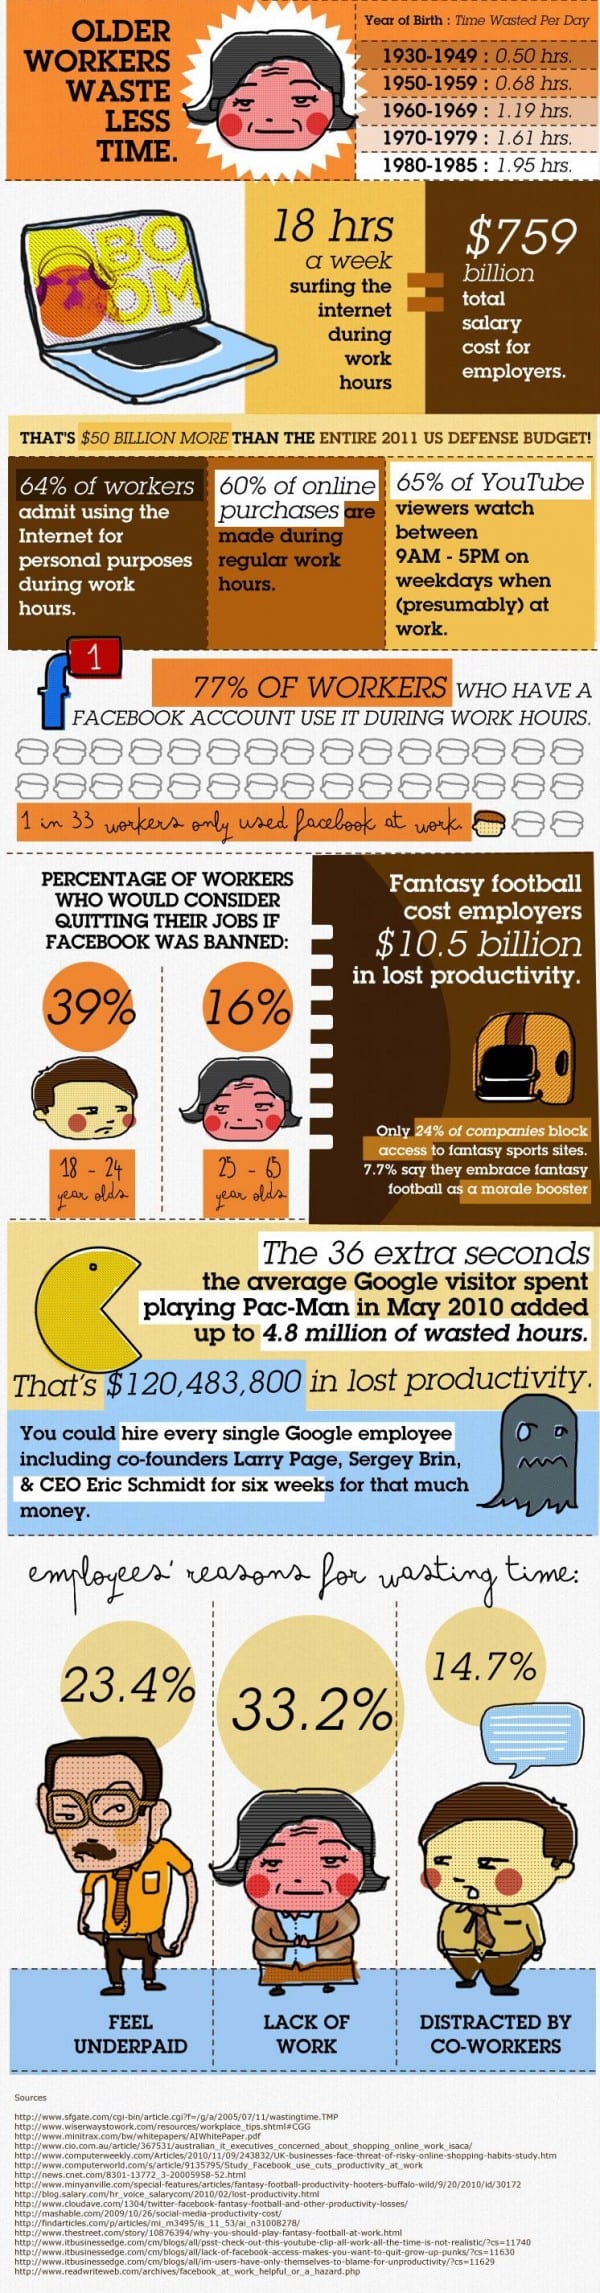 Older Workers Waste Less Time Infographic